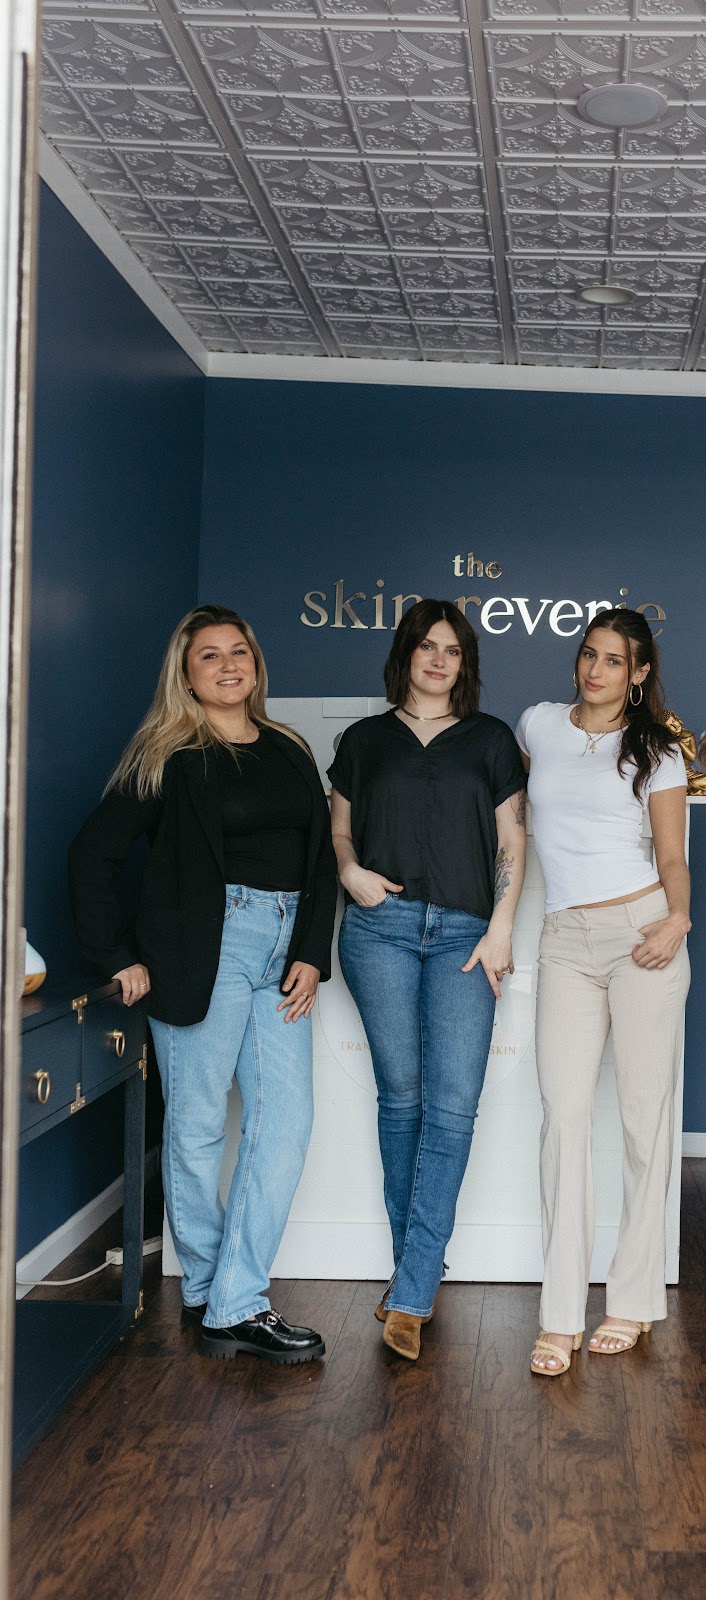 The Skin Reverie | 576 Middle Rd, Bayport, NY 11705 | Phone: (631) 438-1163